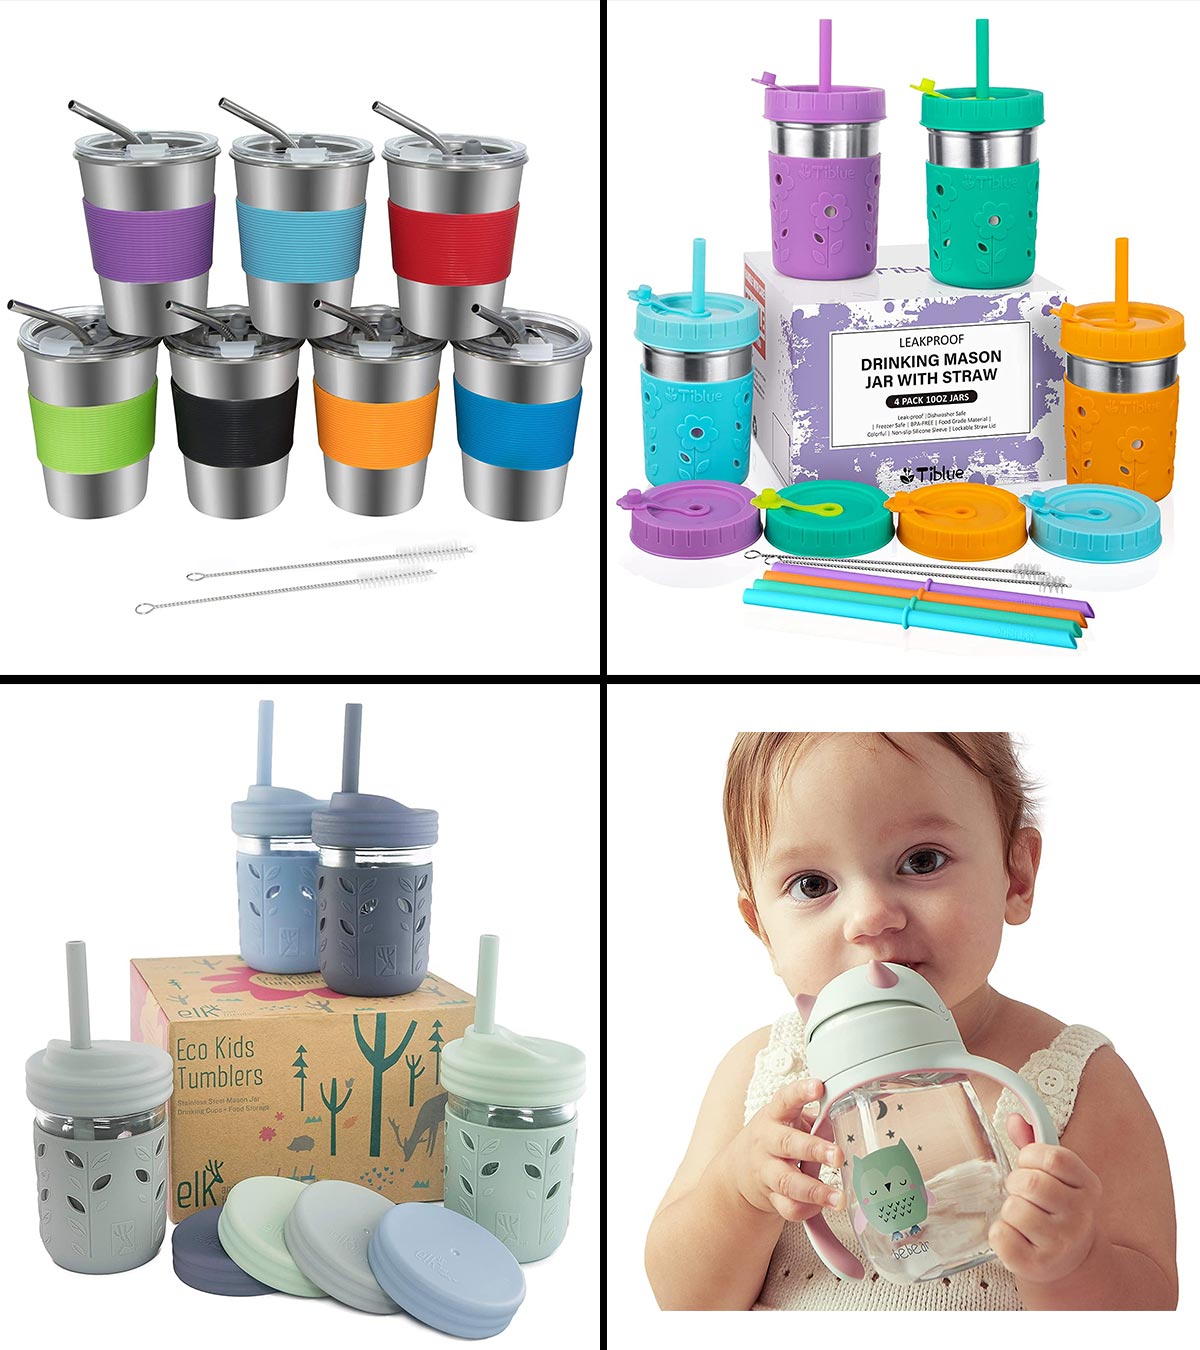 How to Clean the Built-In Straws on Kids' Sippy Cups & Bowls